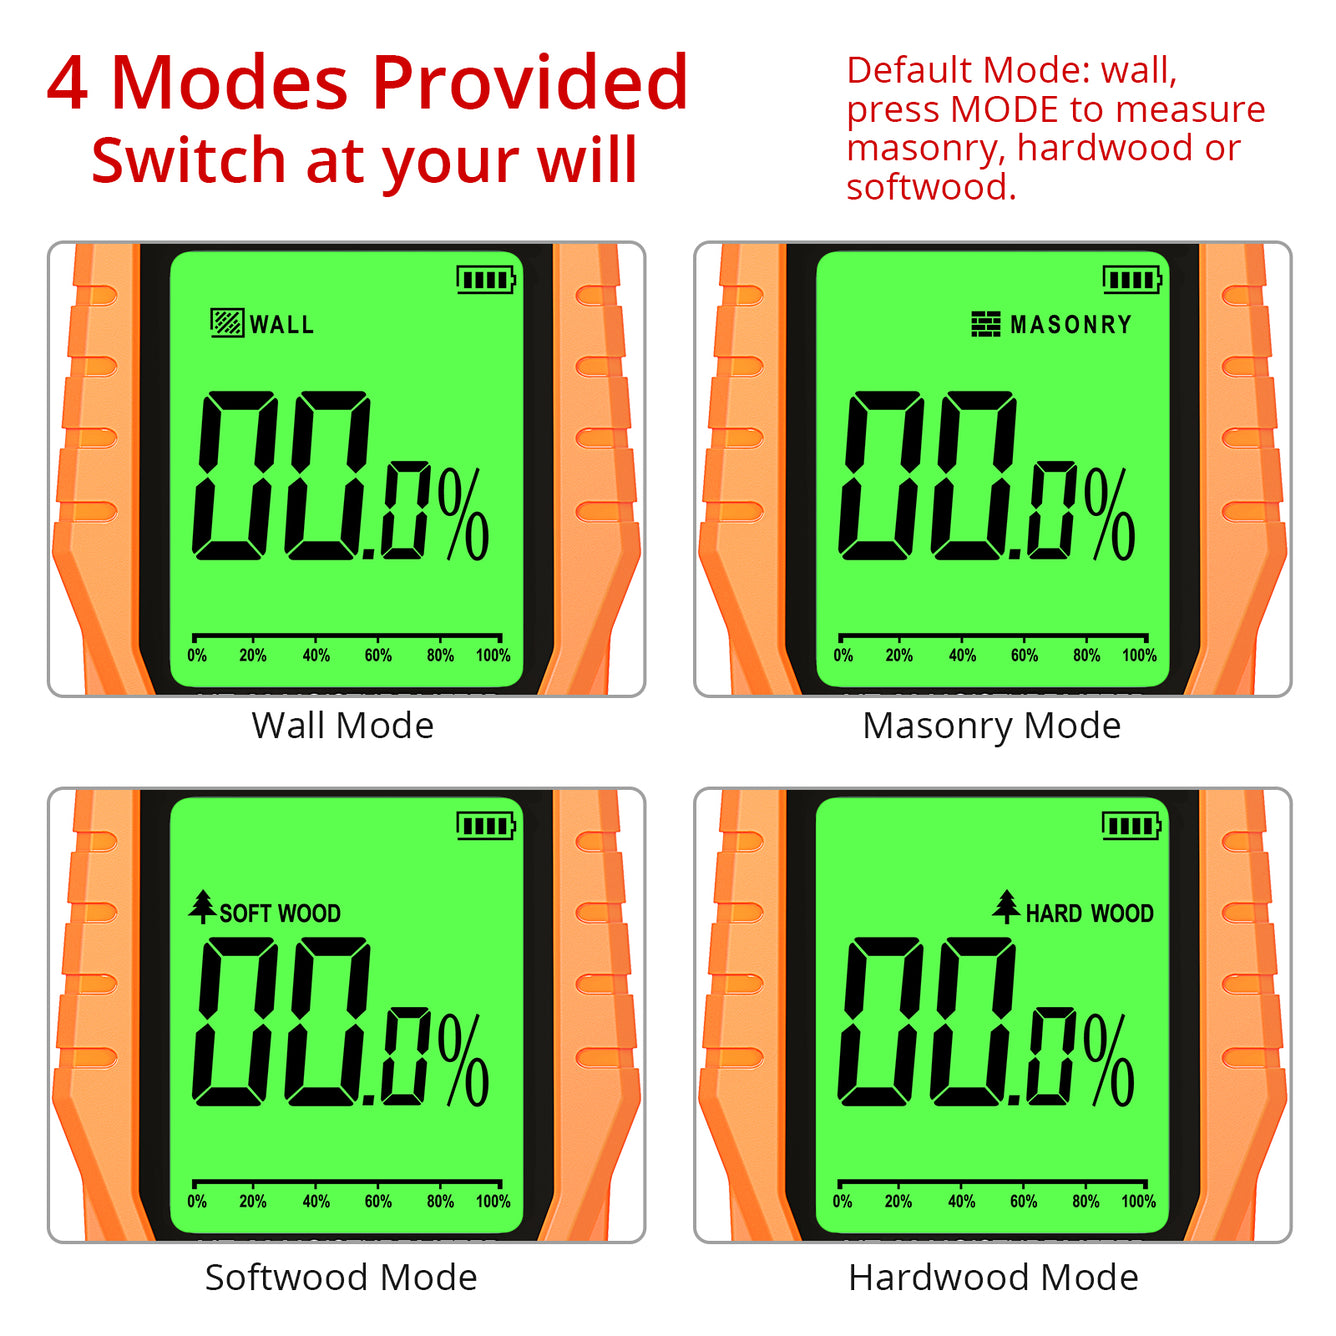 Proster Pinless Moisture Meters with Backlit LCD Screen